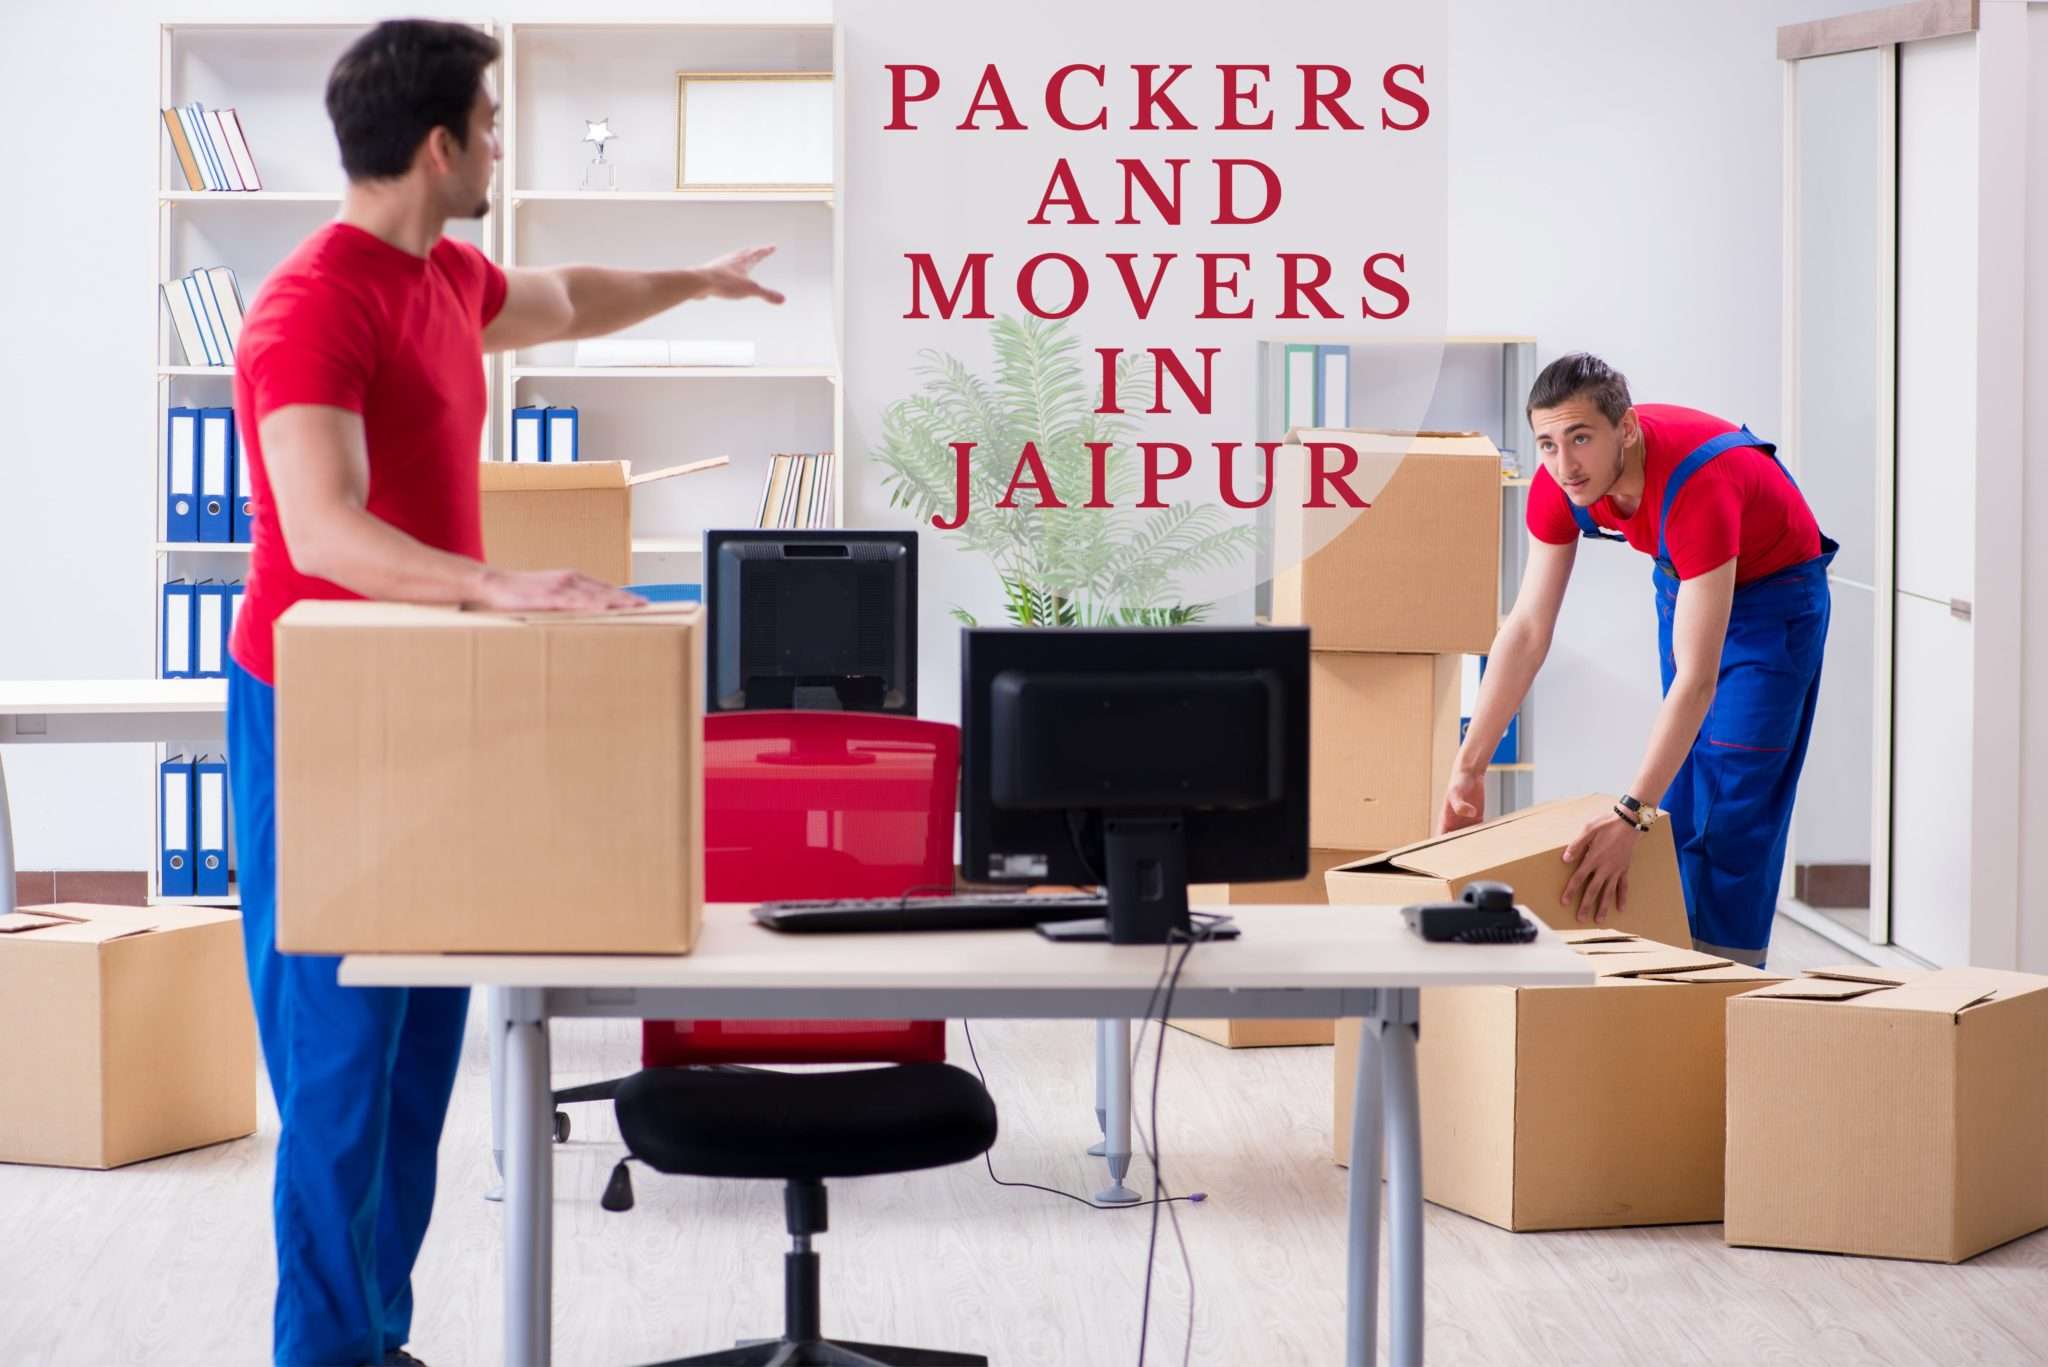 Packers and Movers in Jaipur | Packers and Movers Near Me